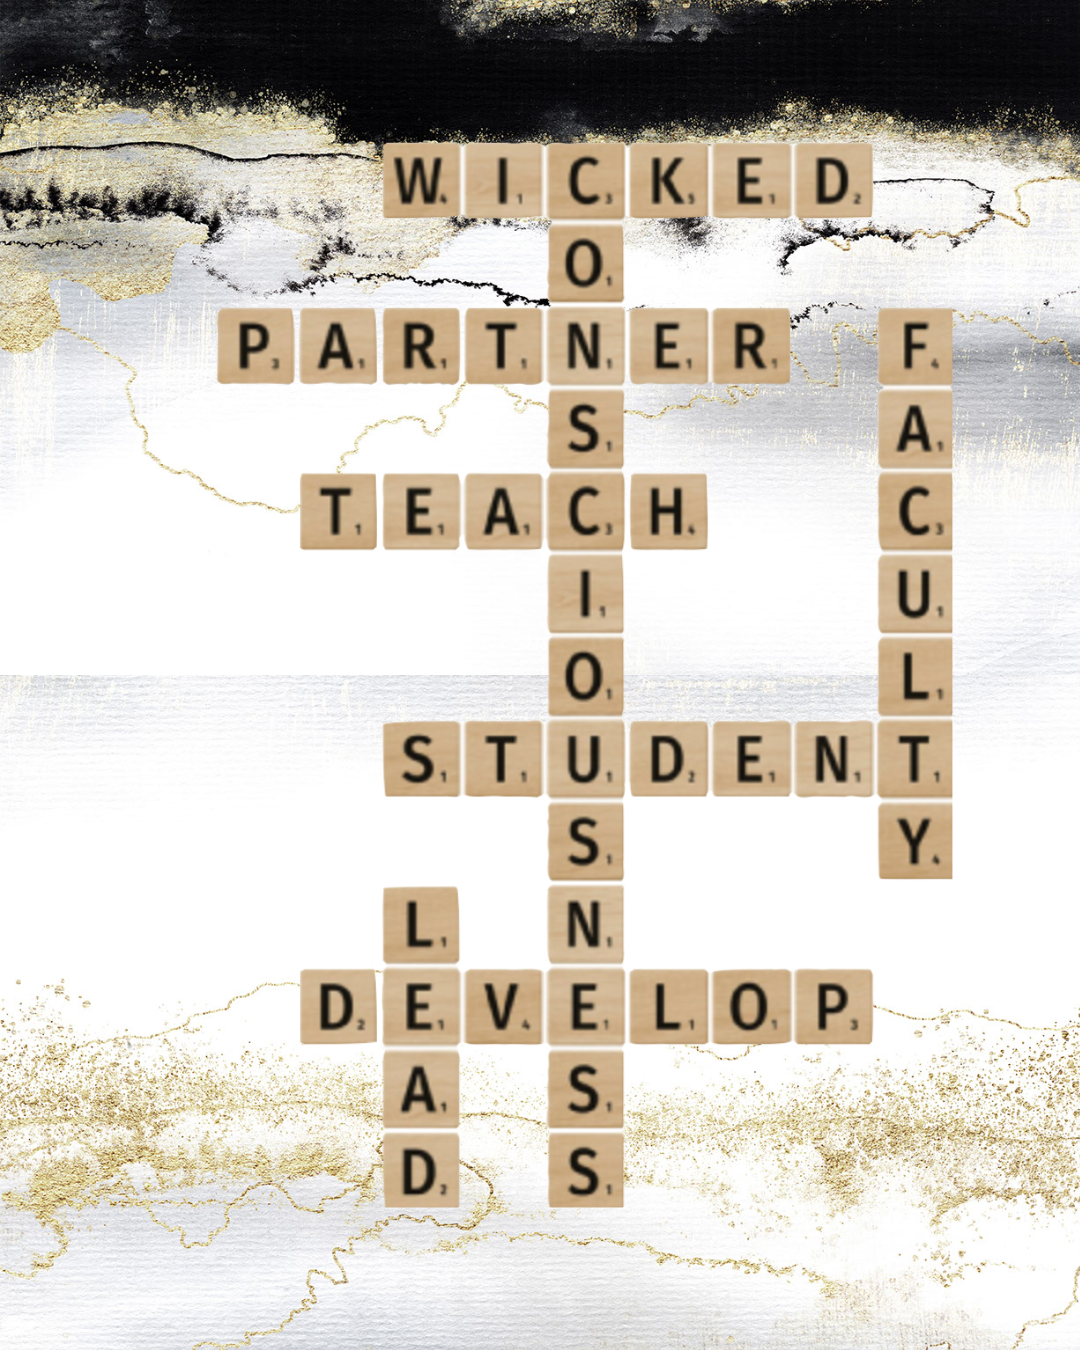 Taking teaching and learning seriously: Approaching wicked consciousness through collaboration and partnership